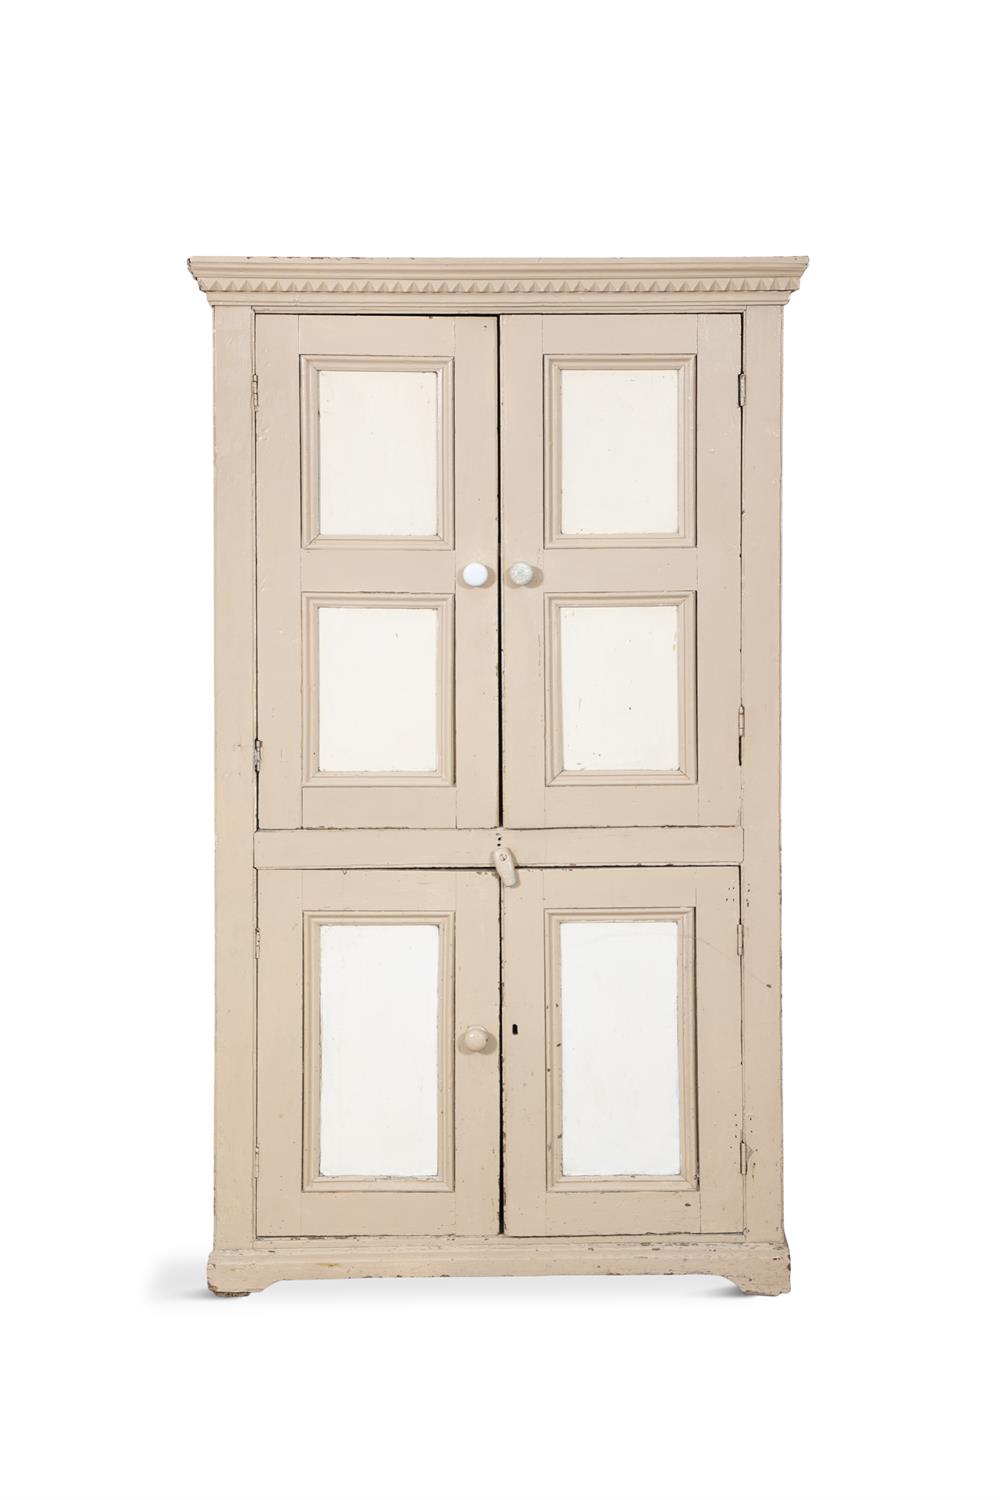 A 19TH CENTURY PAINTED PINE CUPBOARD, the cornice with saw-tooth dentil moulding above two twin